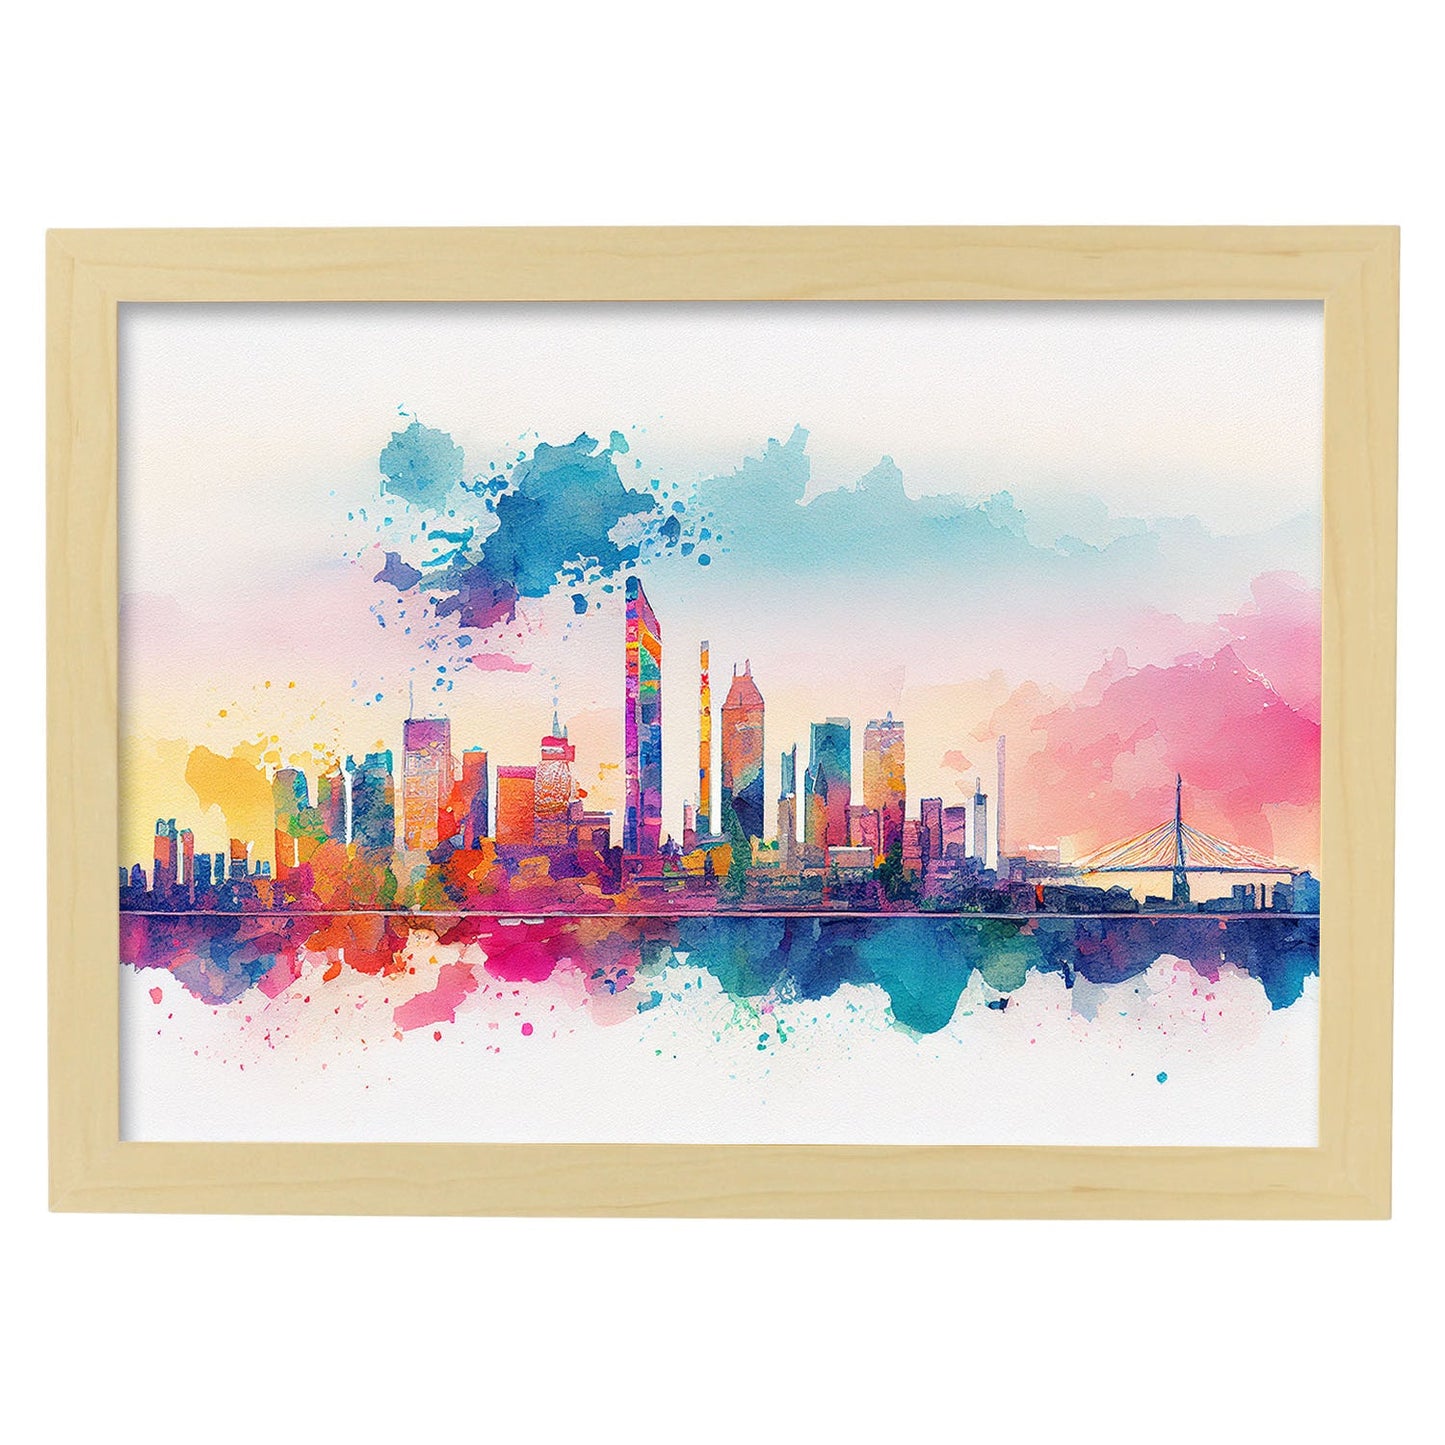 Nacnic watercolor of a skyline of the city of Osaka. Aesthetic Wall Art Prints for Bedroom or Living Room Design.-Artwork-Nacnic-A4-Marco Madera Clara-Nacnic Estudio SL